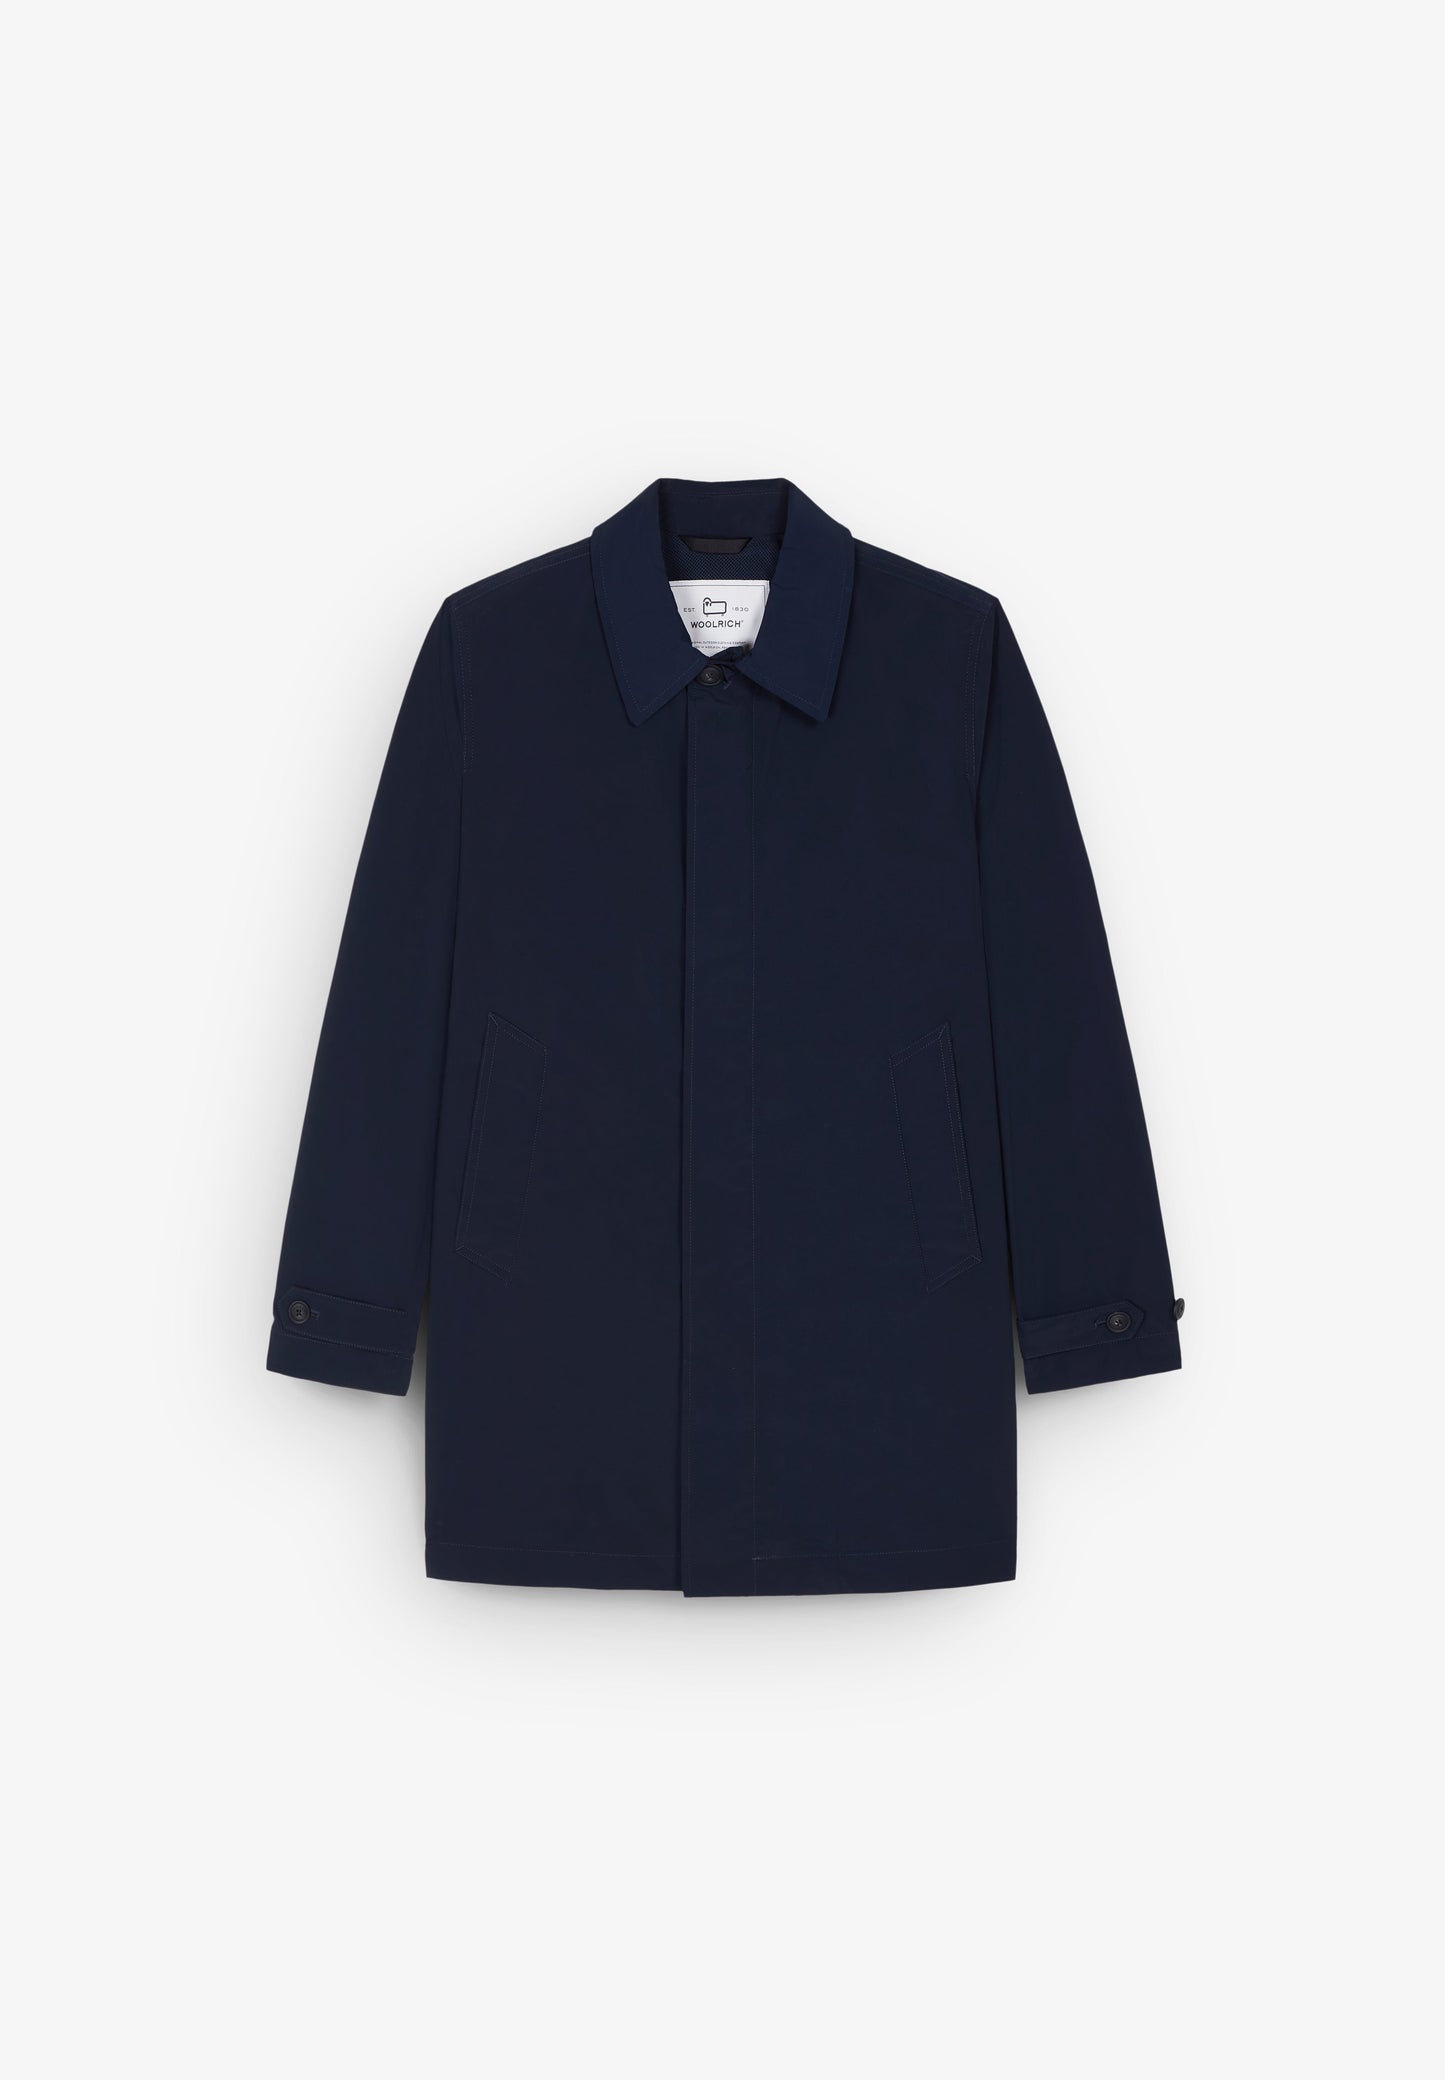 WOOLRICH | NEW CITY CARCOAT